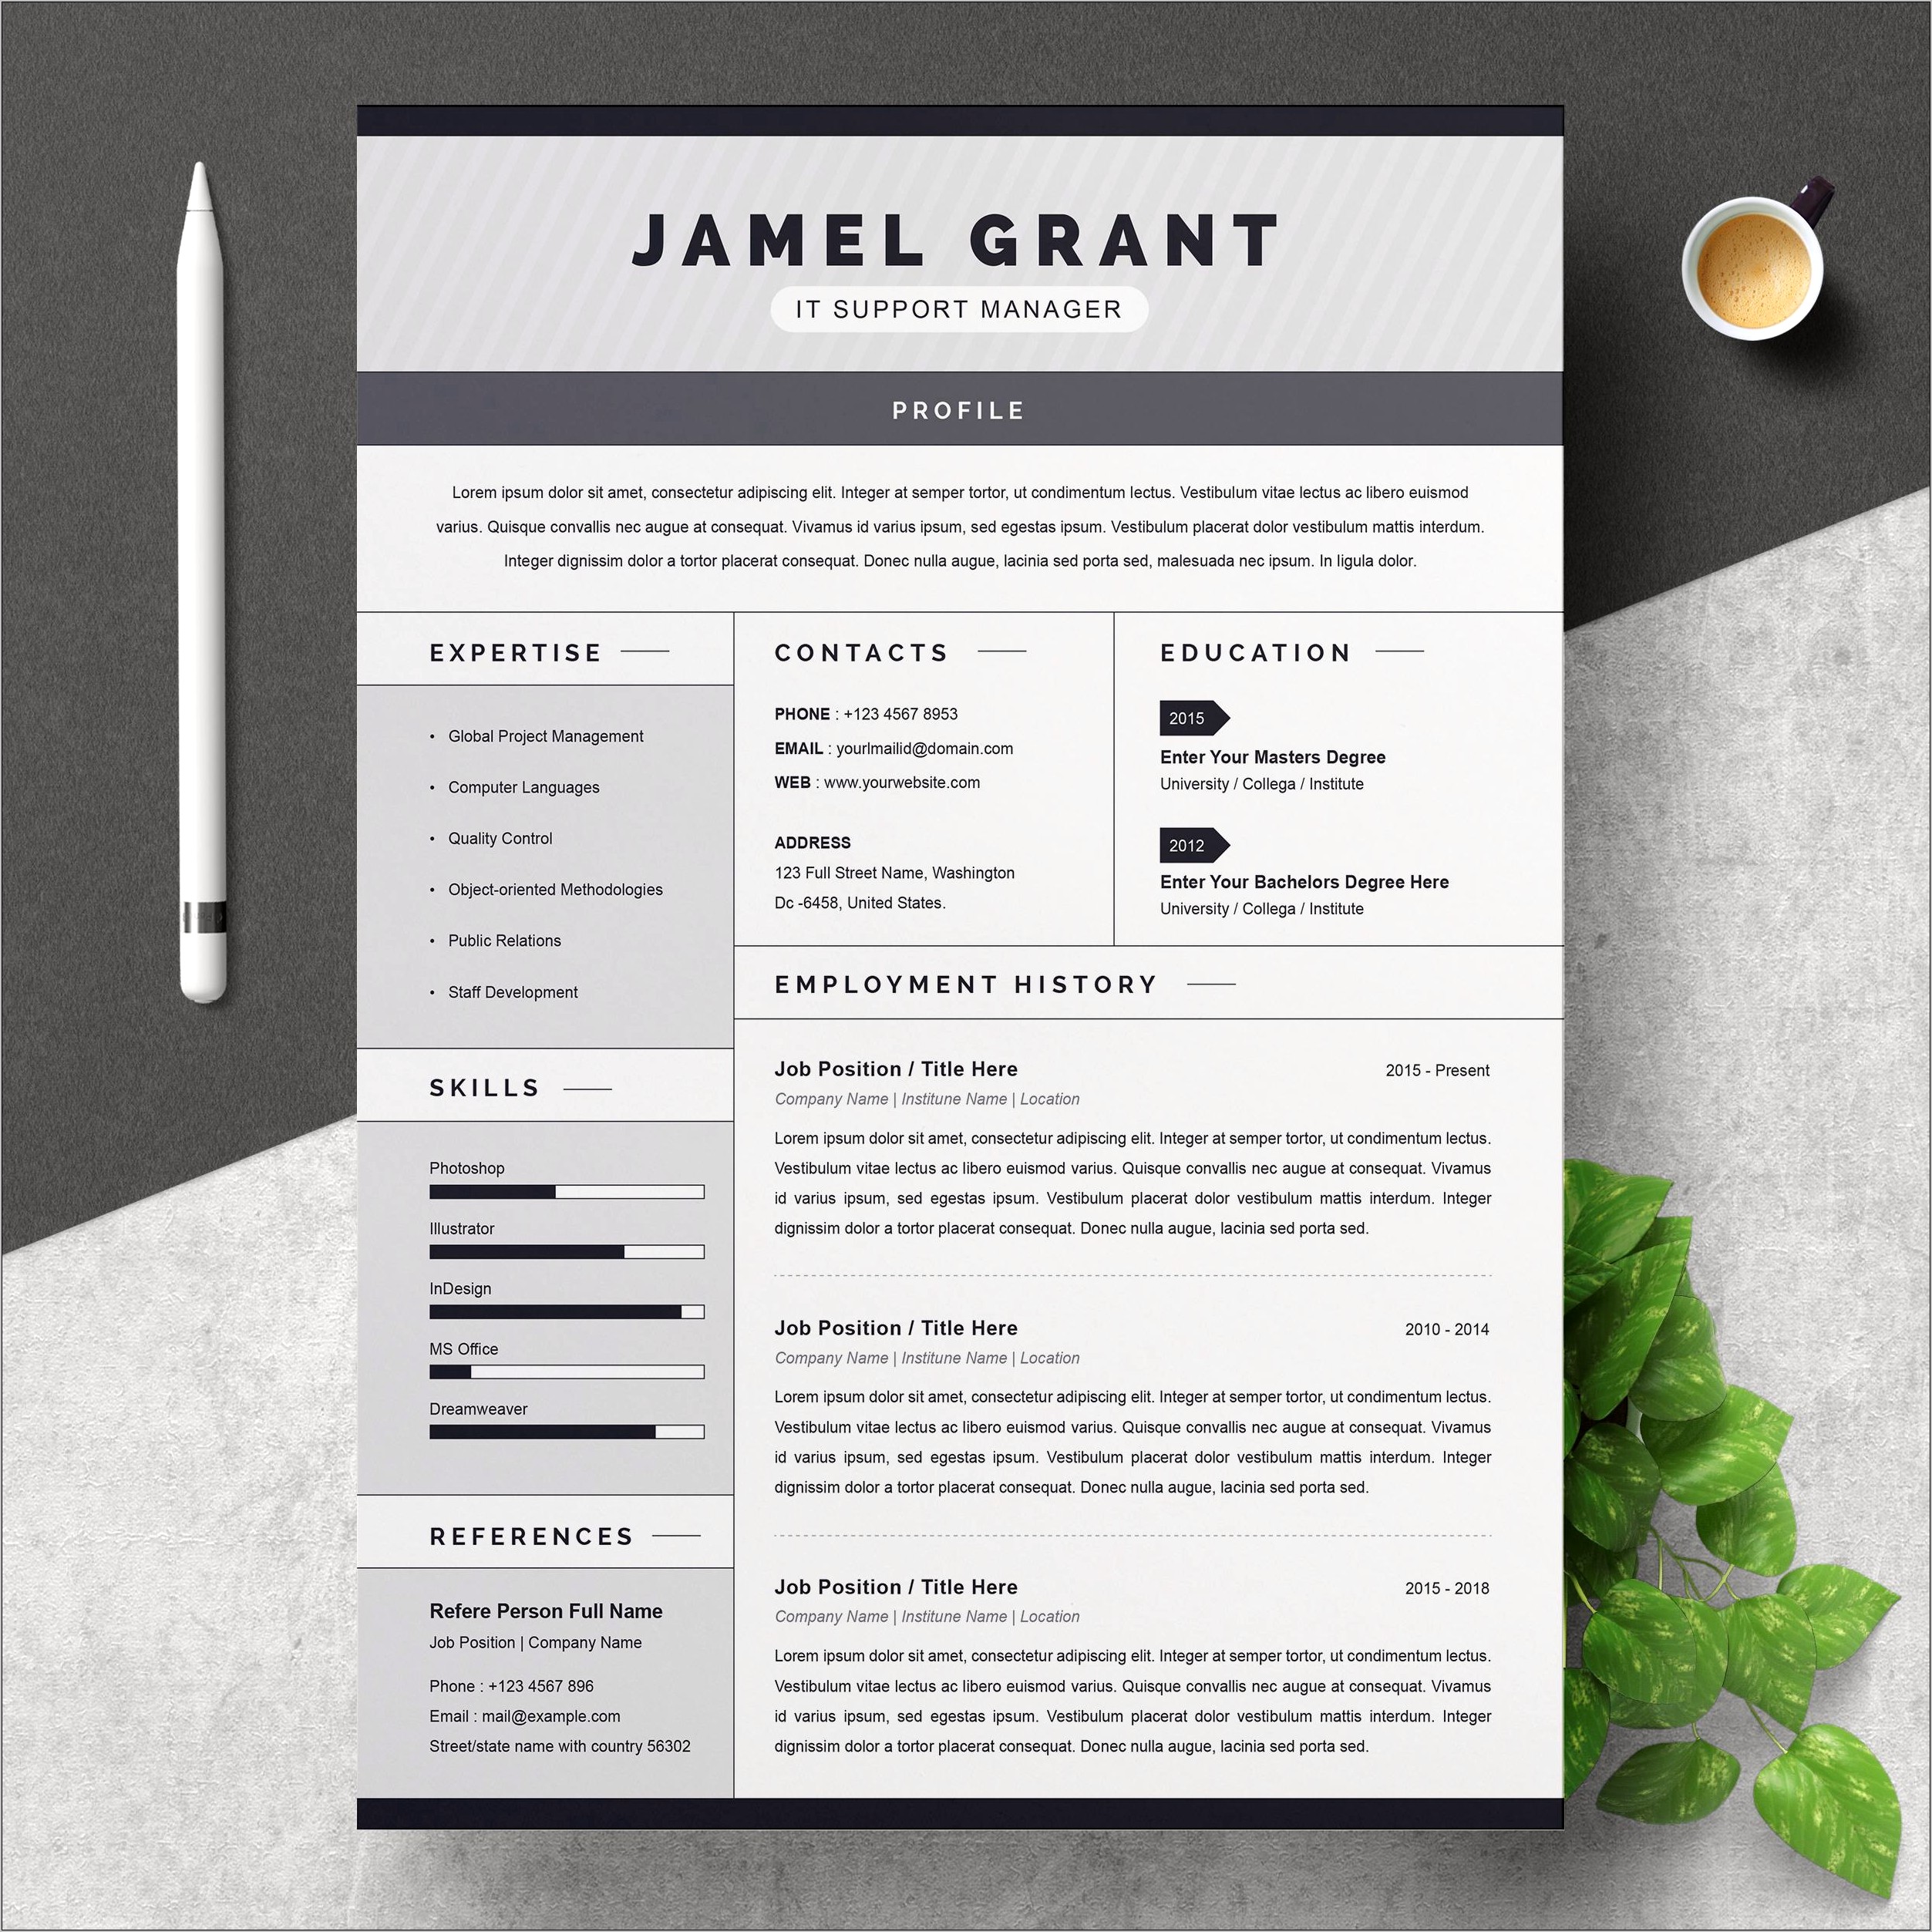 Resume Thst Fits On One Page Template